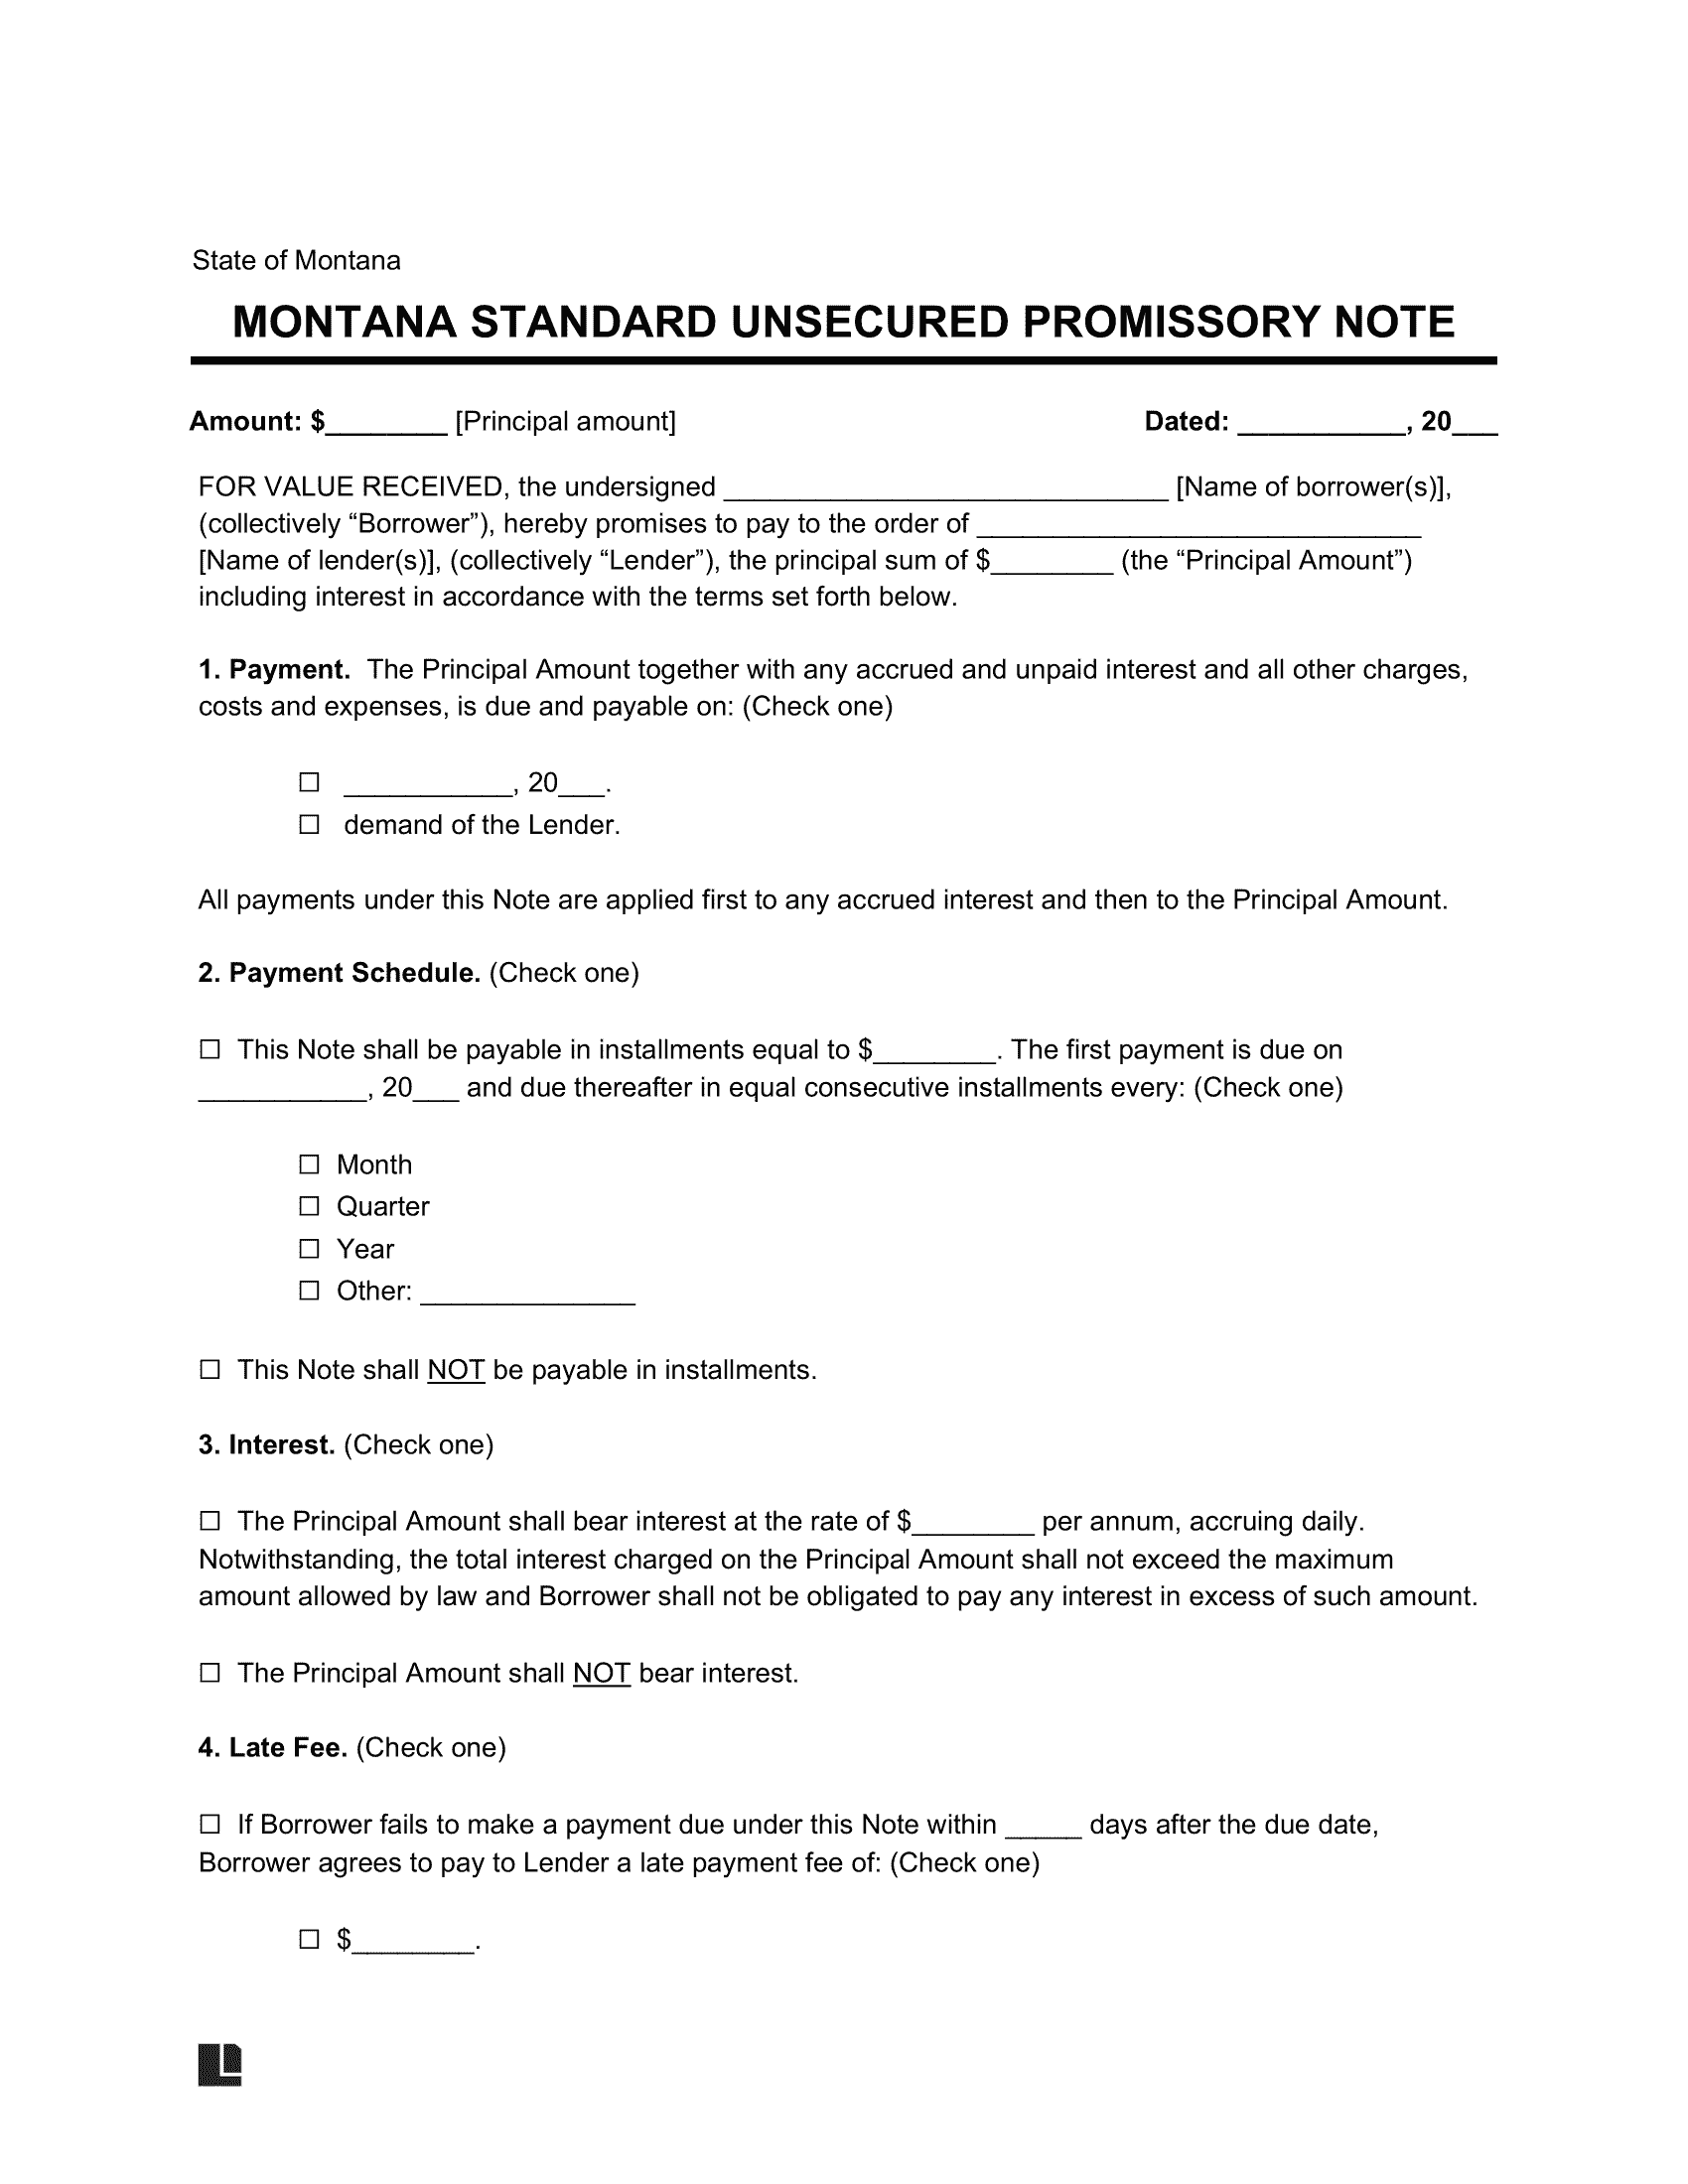 Montana Standard Unsecured Promissory Note Template